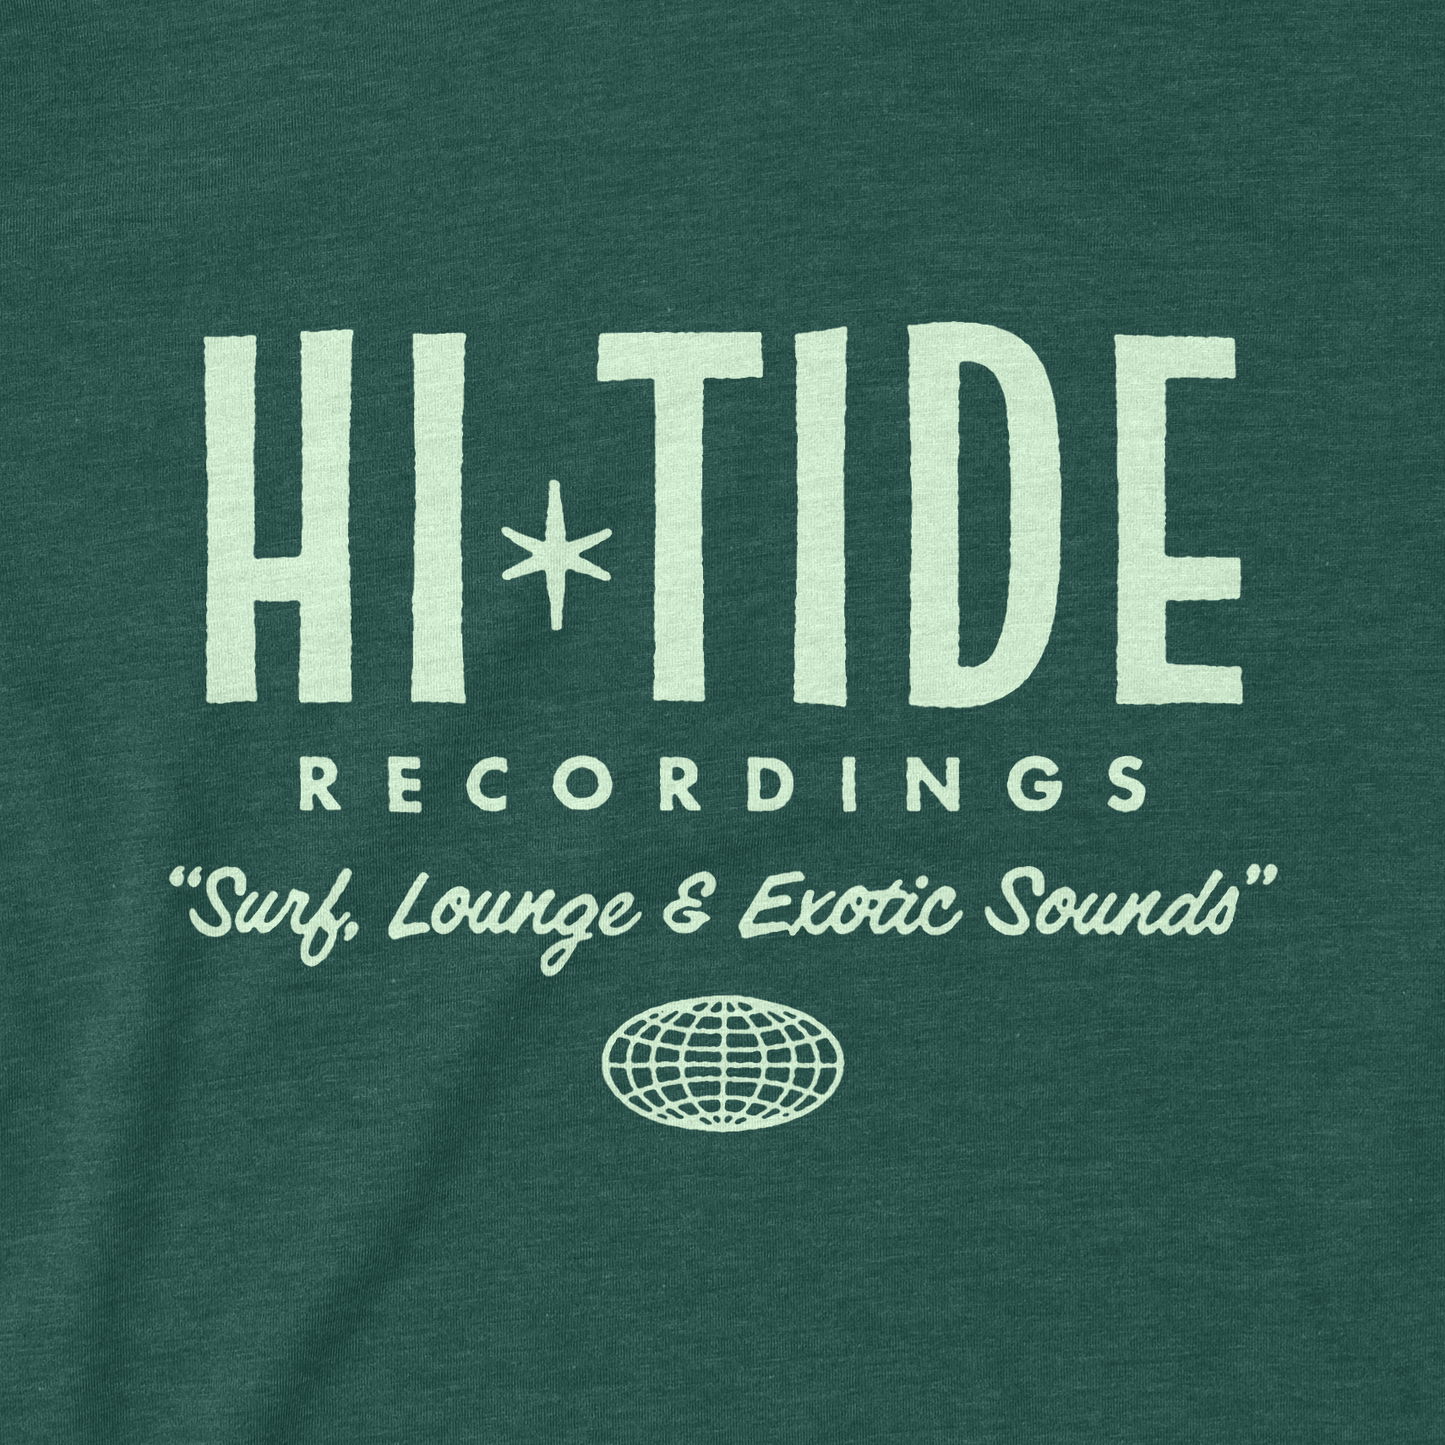 Surf, Lounge & Exotic Sounds "Holly-Tone" T